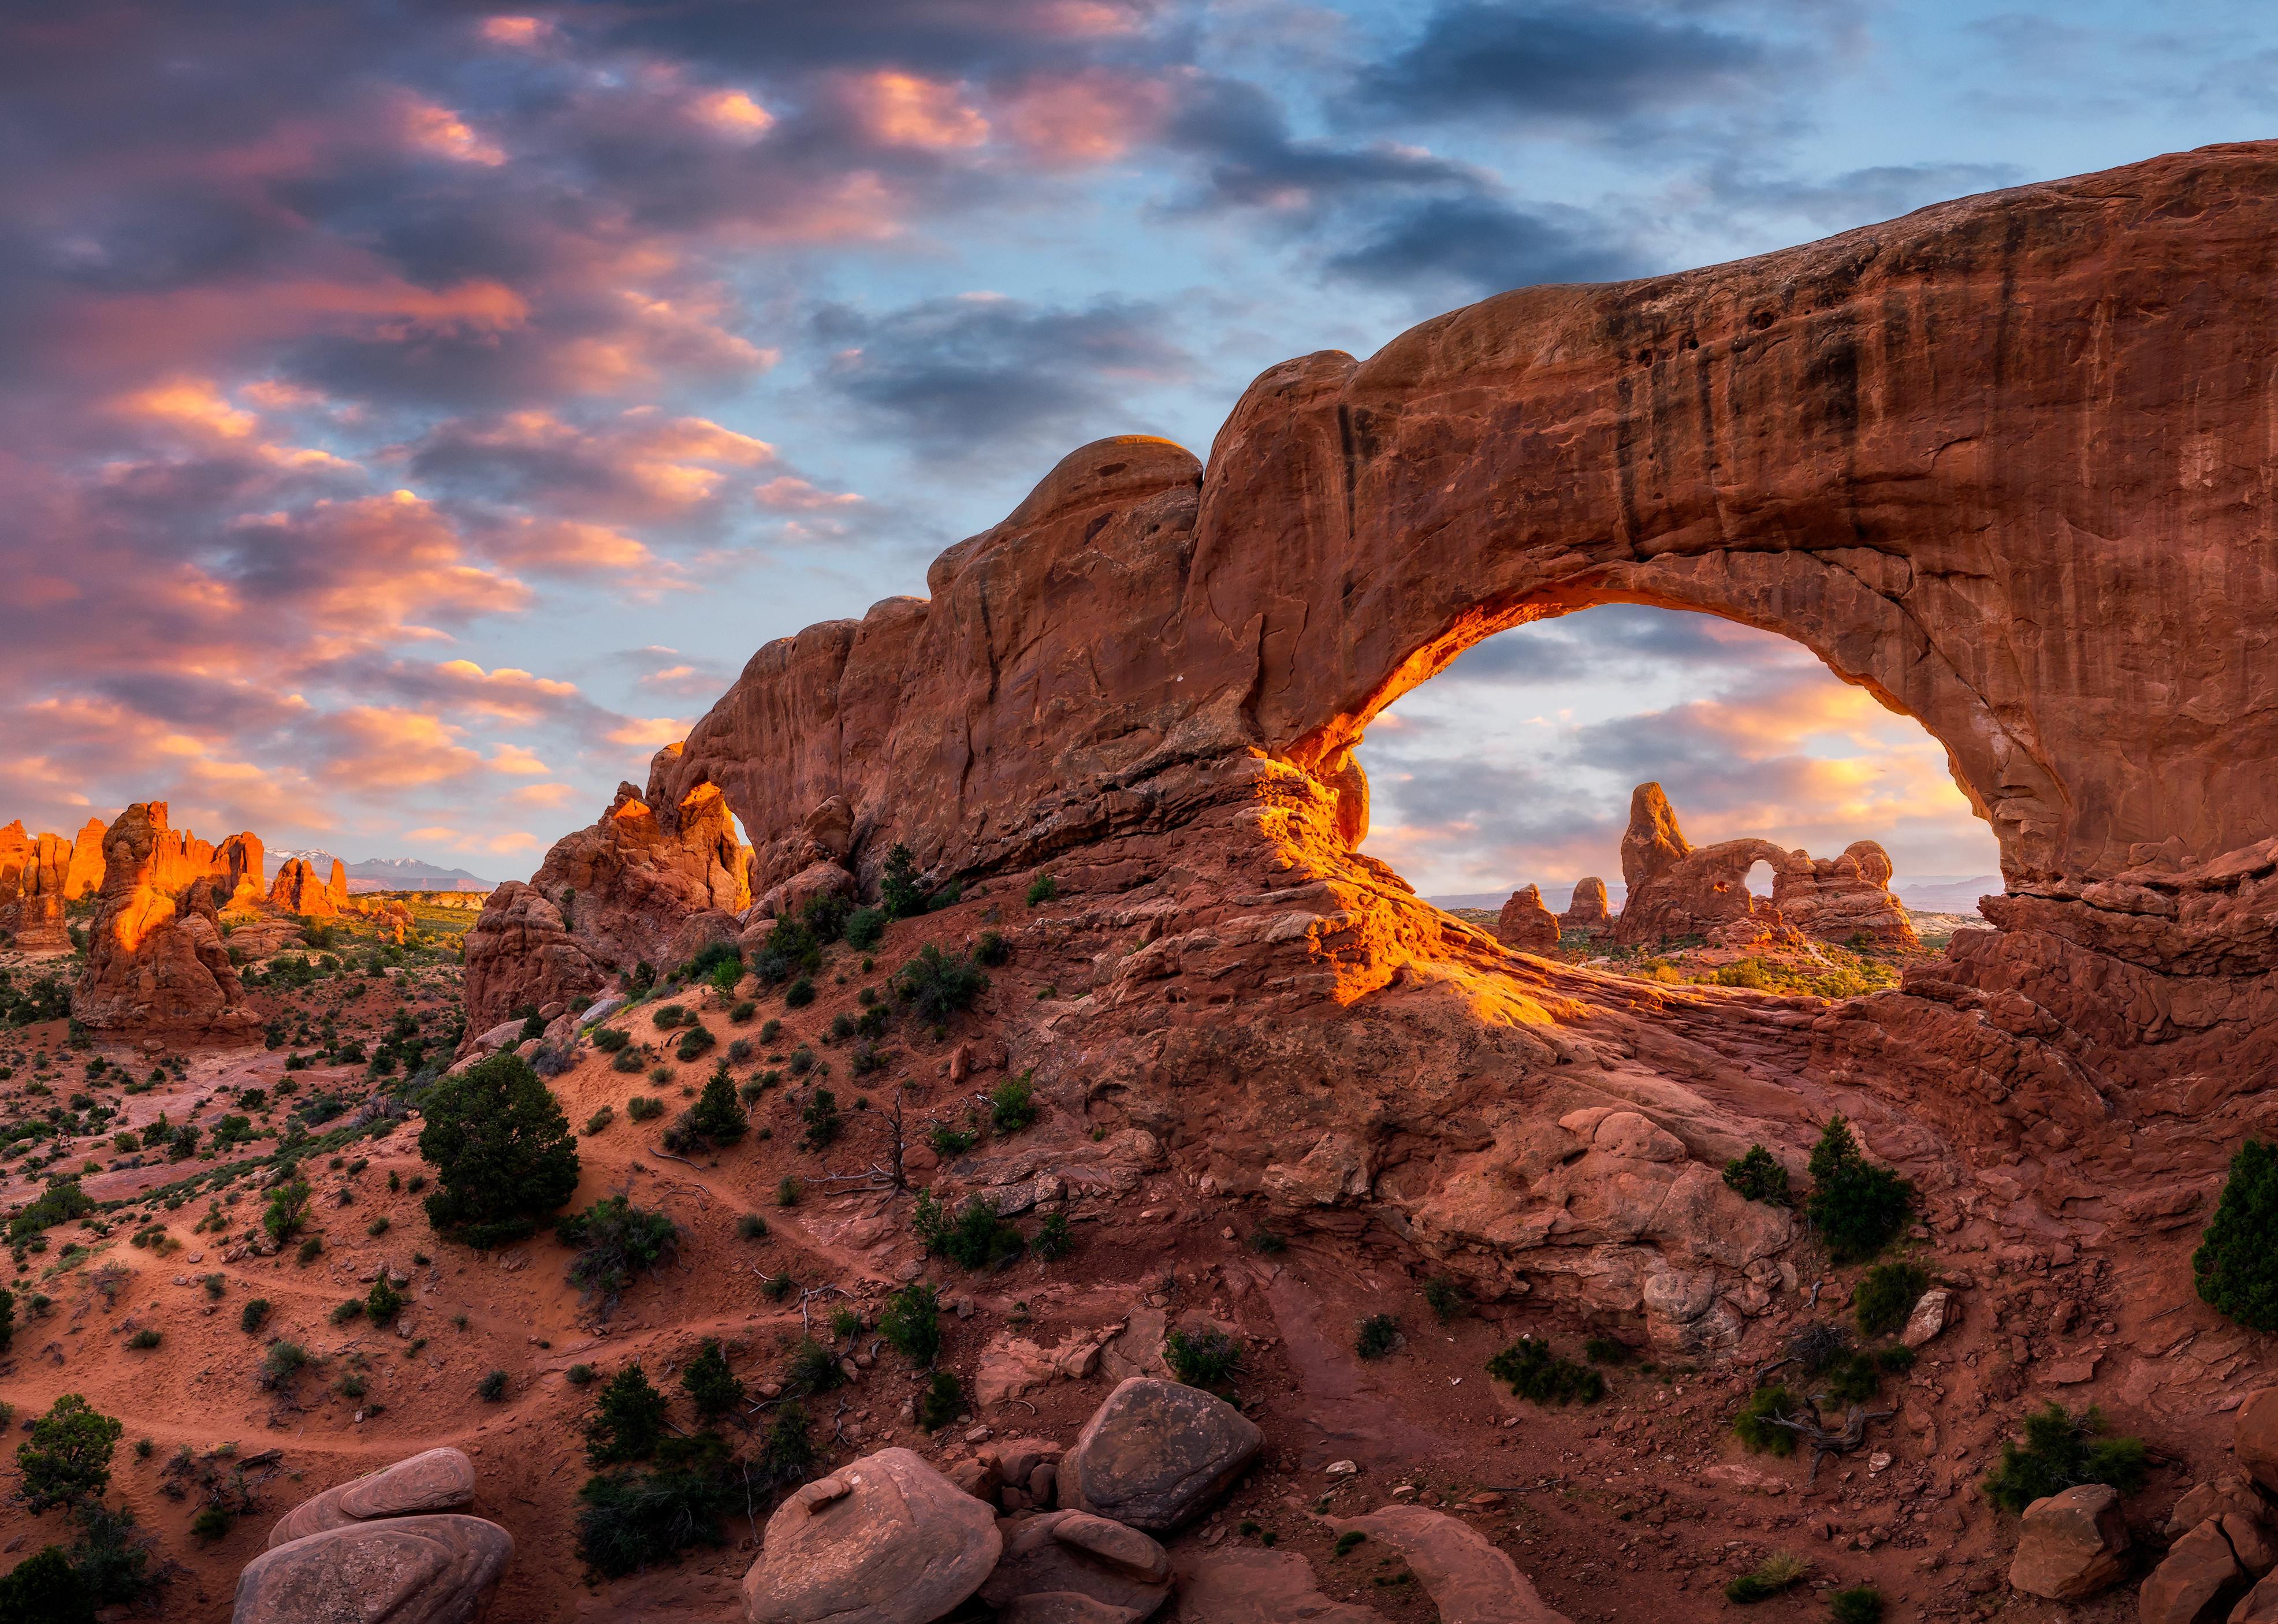 Evening light over North Window with Turret Arch in the distance, Arches National Park Utah.